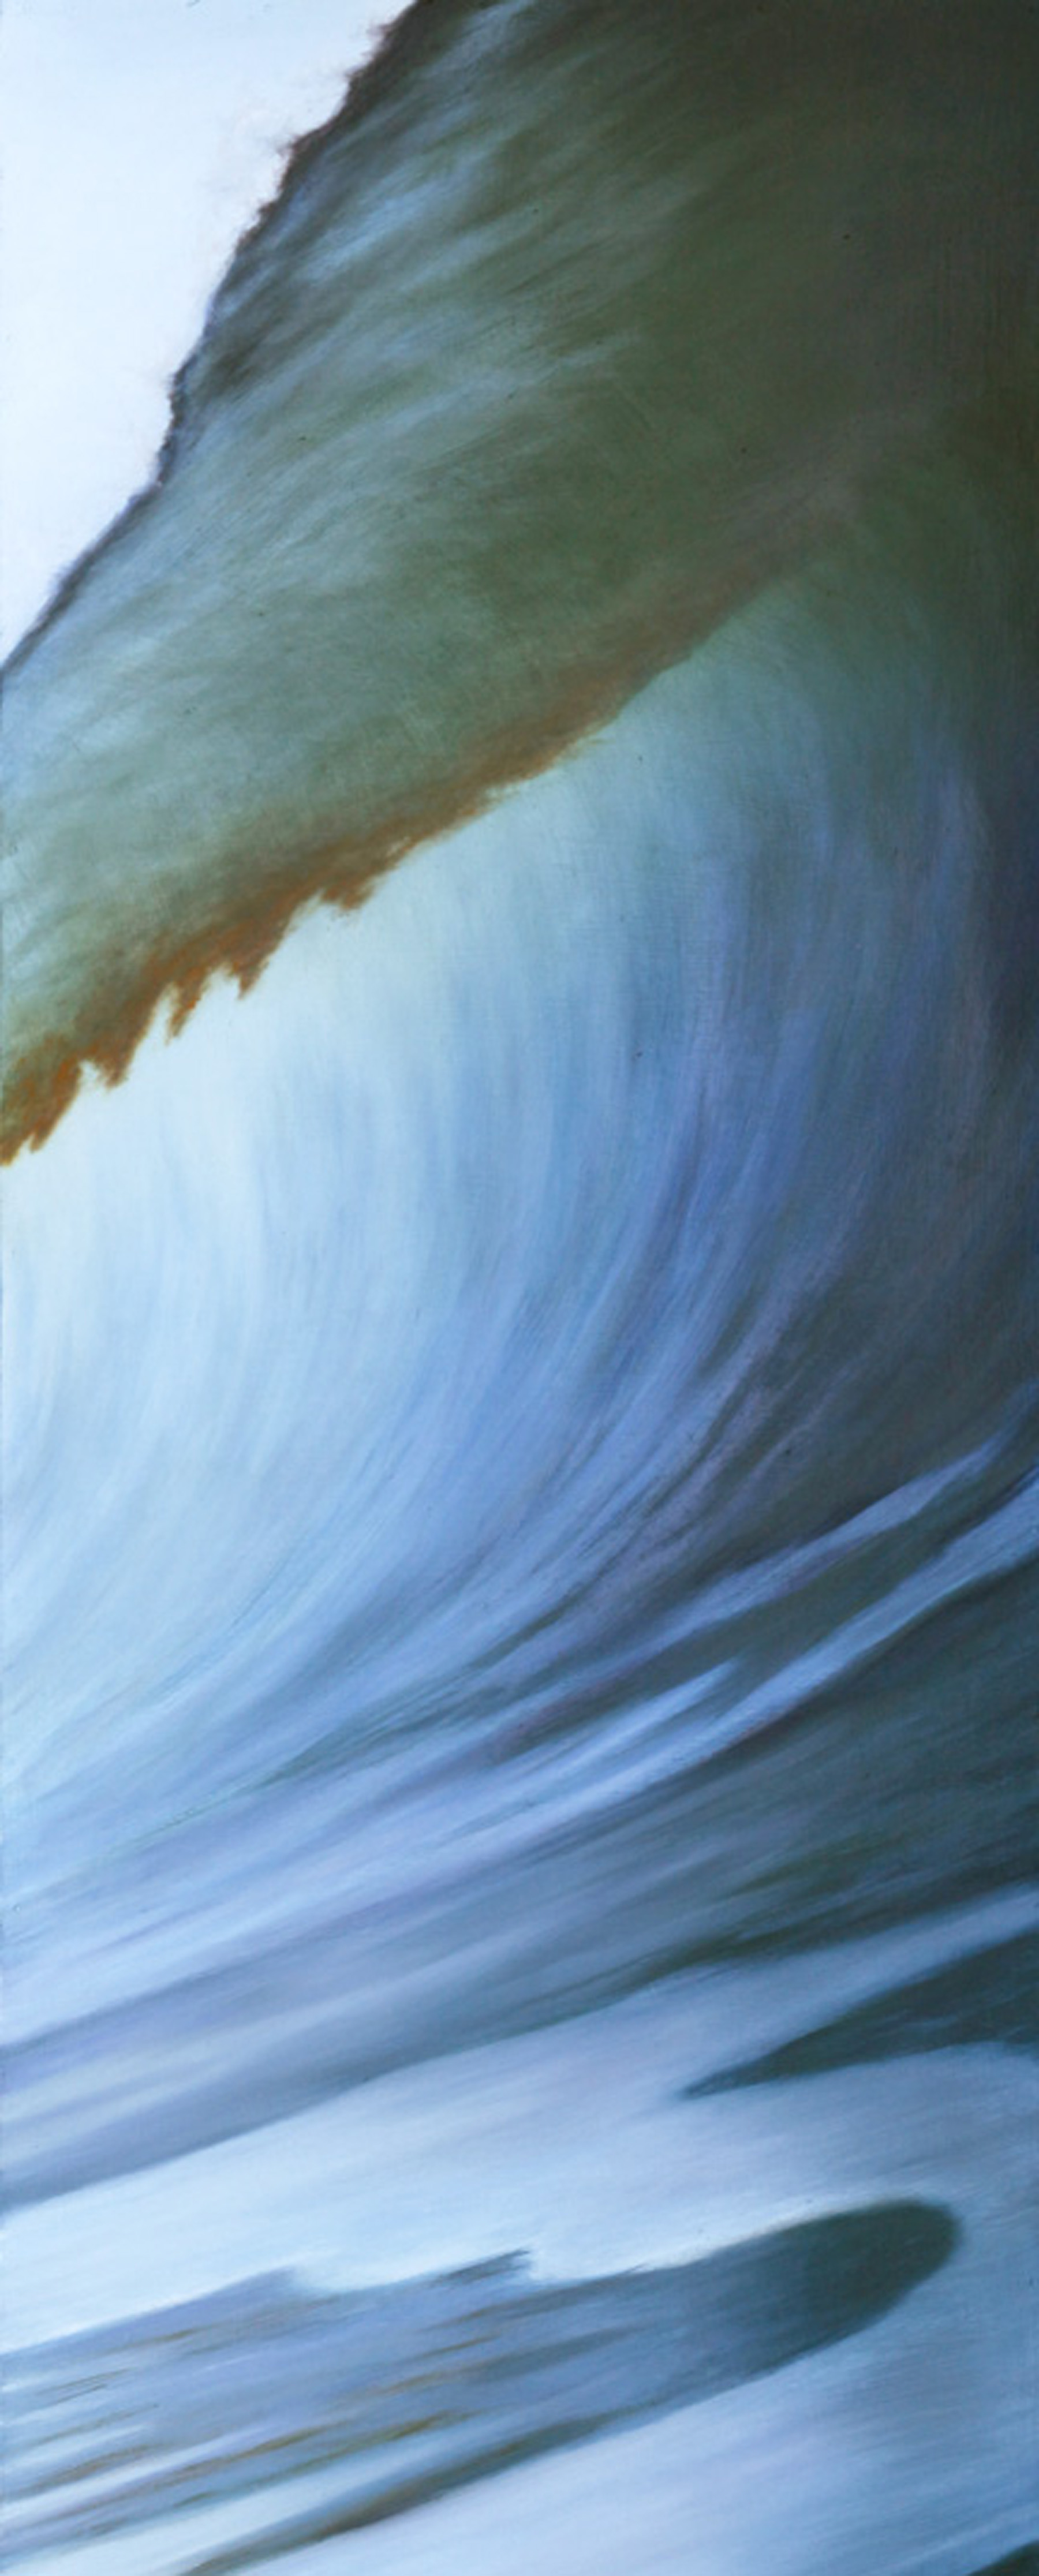  “Vert Wave”   Oil on Wood    52"x19"    Original-Sold    Prints Available    